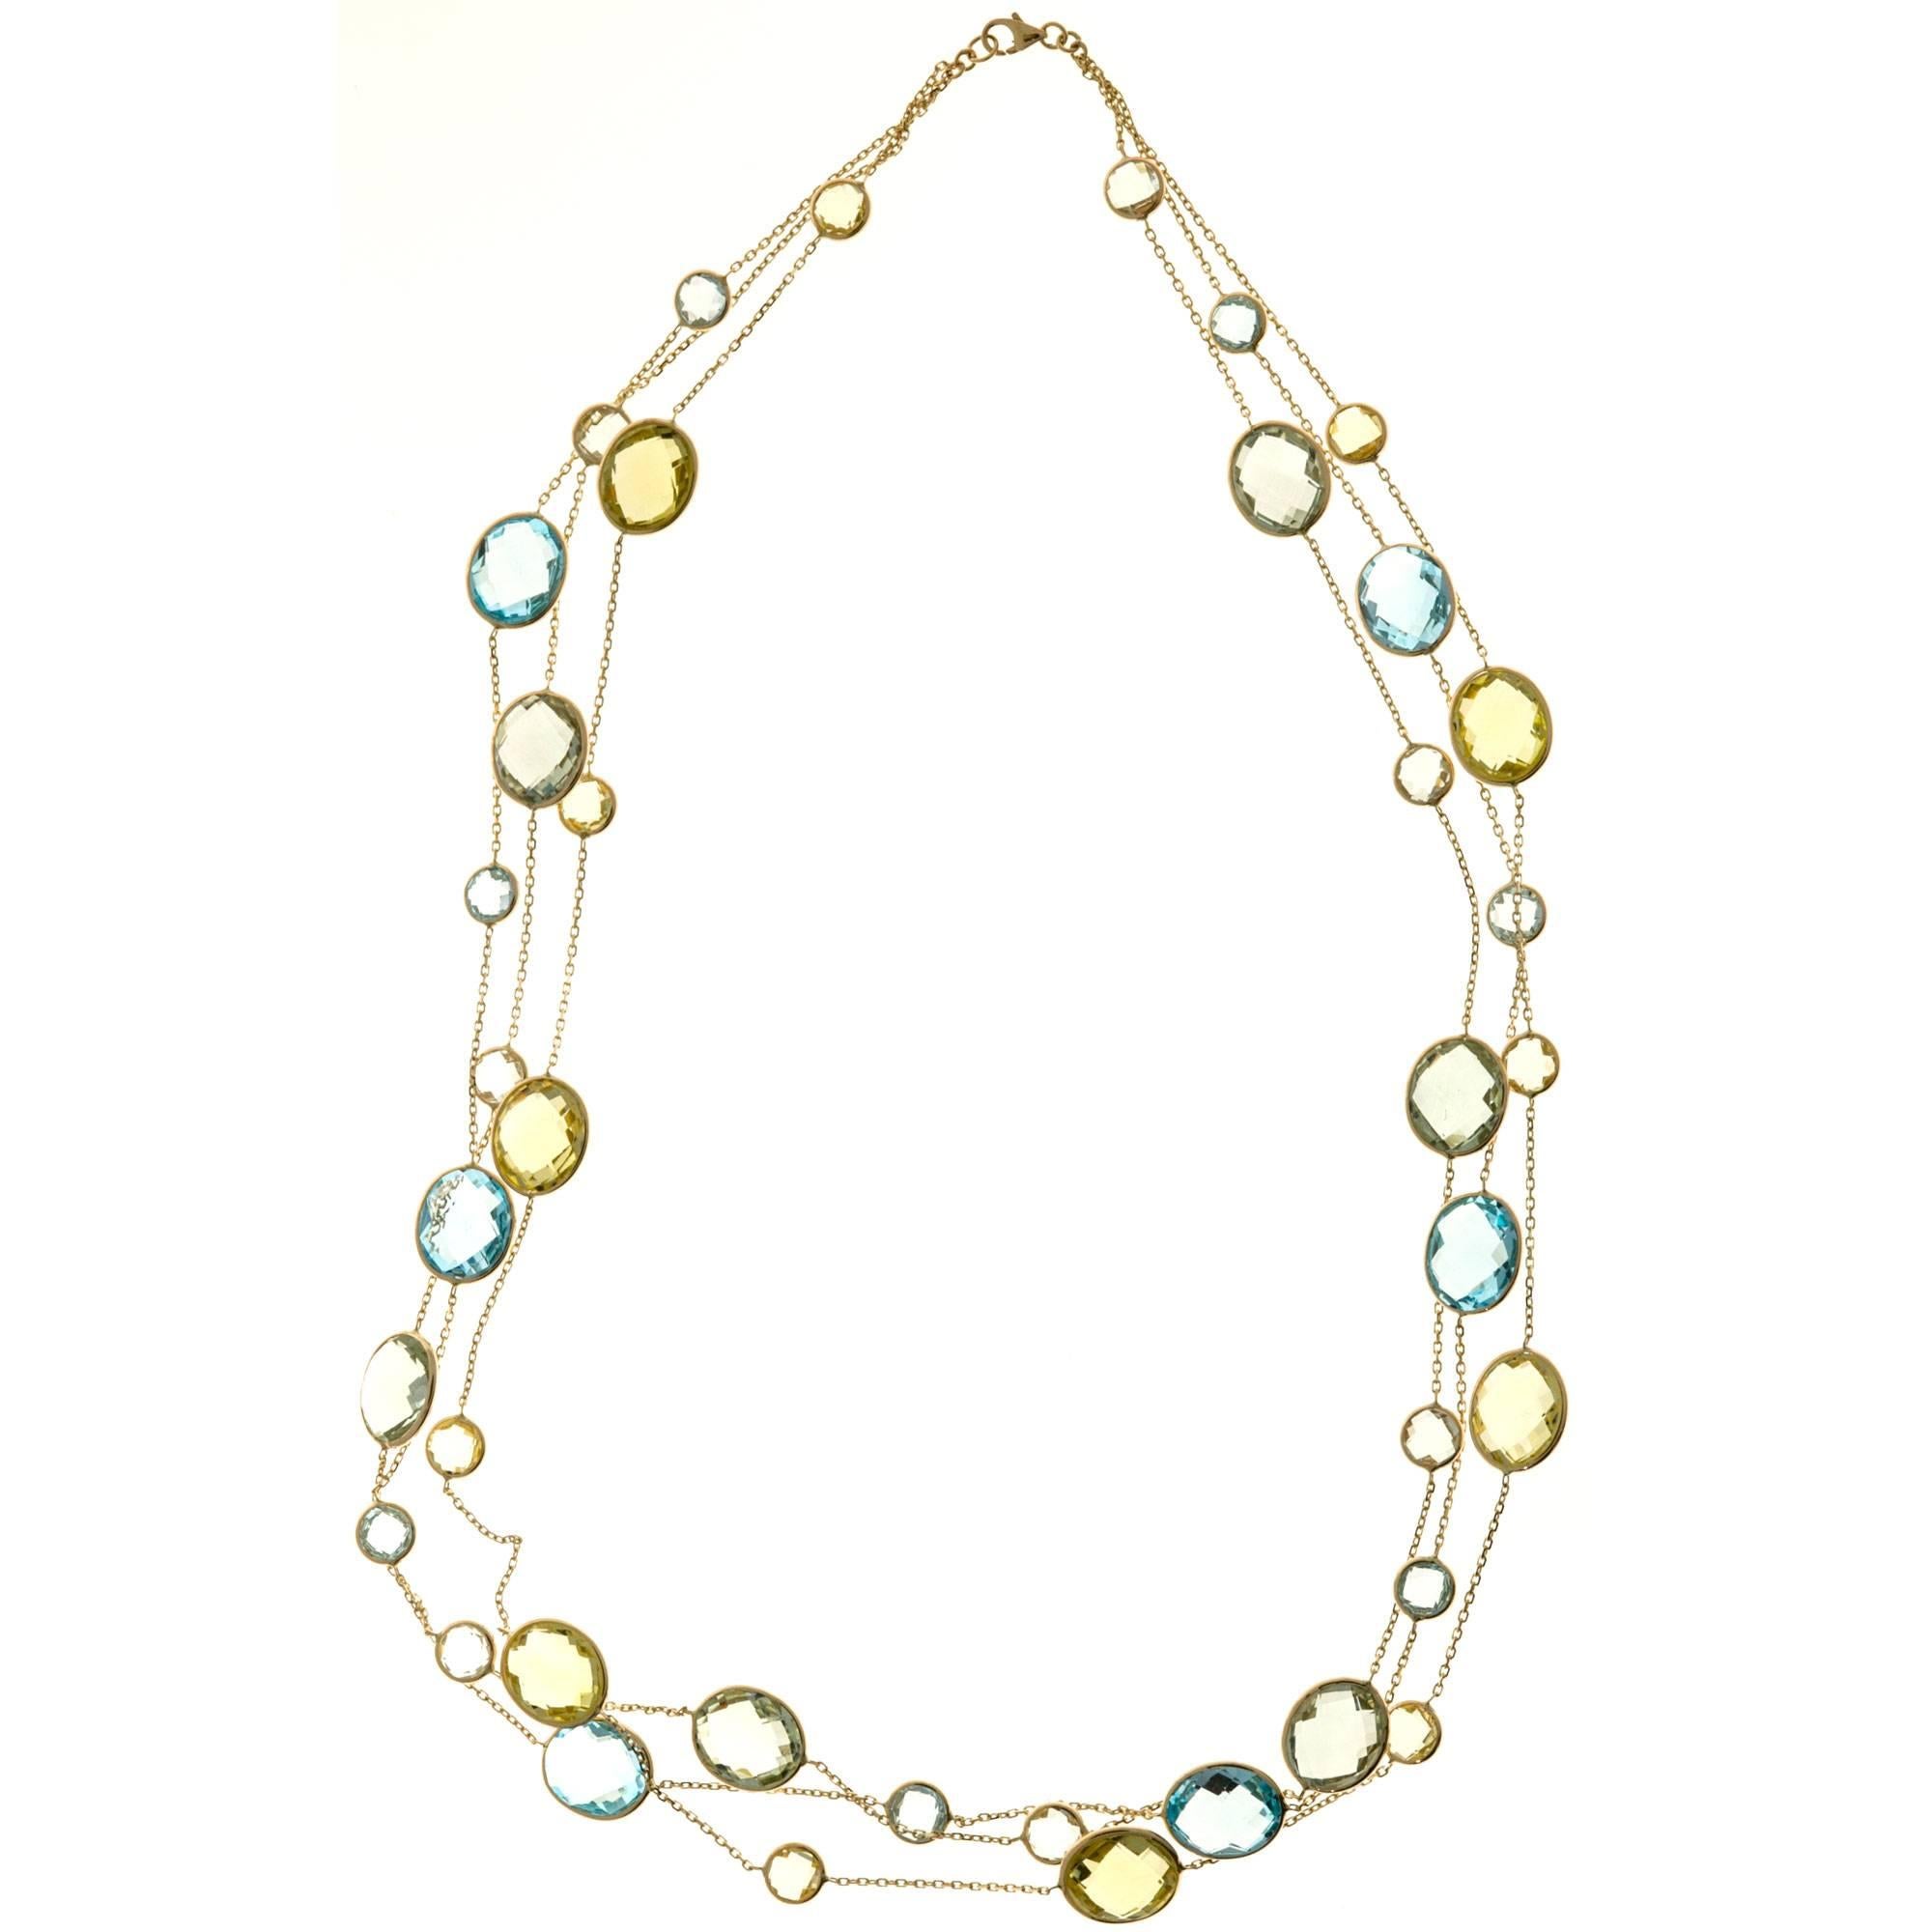 70.00 Cart Lemon Quartz Blue Topaz Green Amethyst Gold Three Strand Necklace In Good Condition For Sale In Stamford, CT